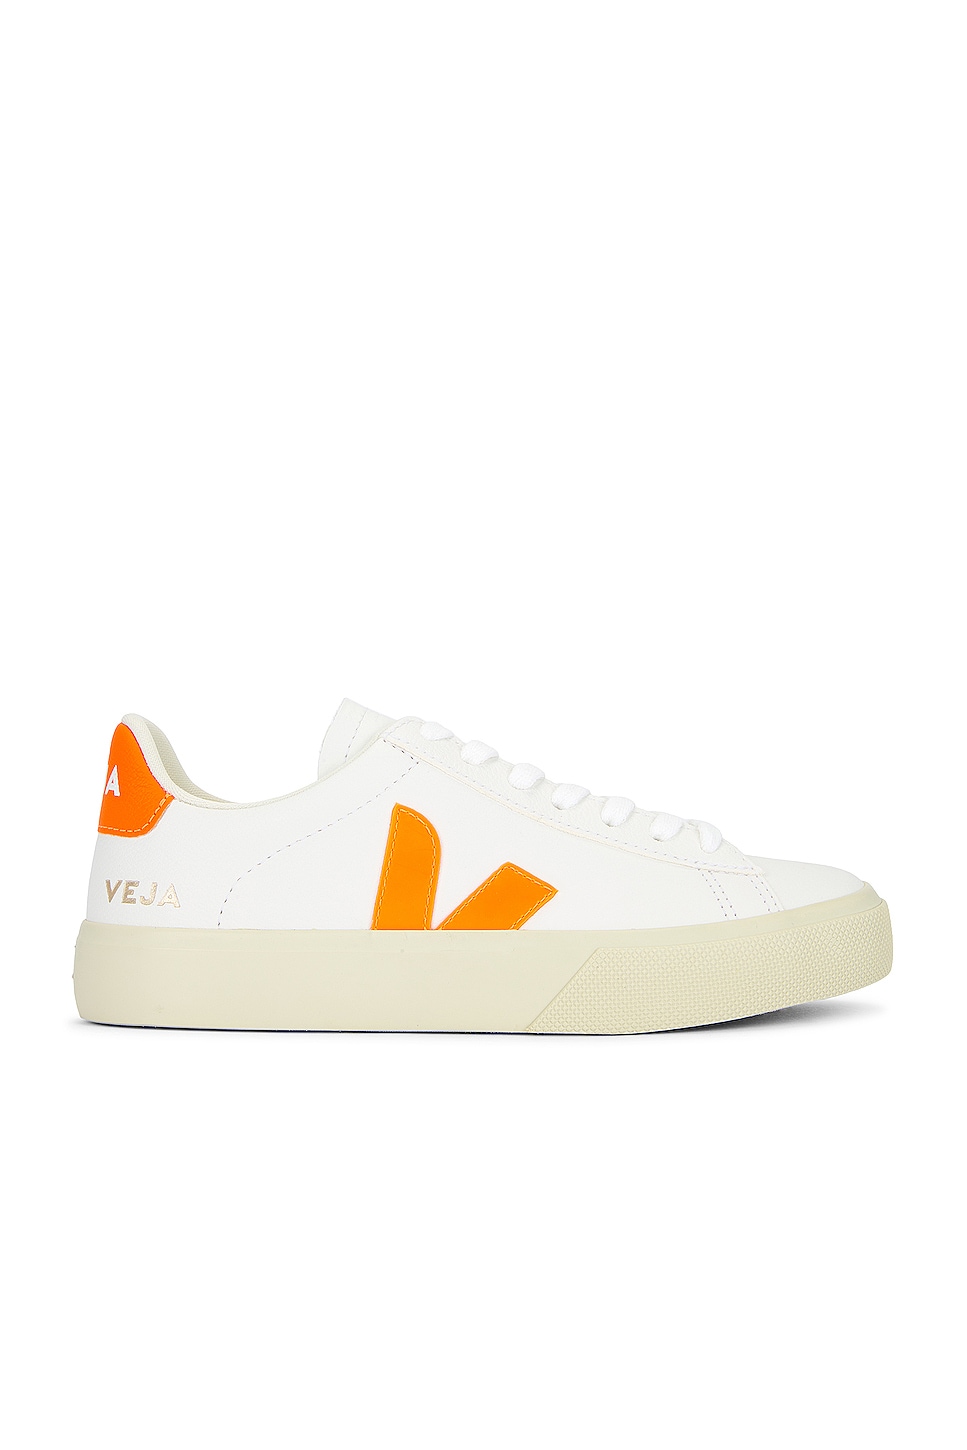 Image 1 of Veja Campo Sneaker in Extra White & Fury